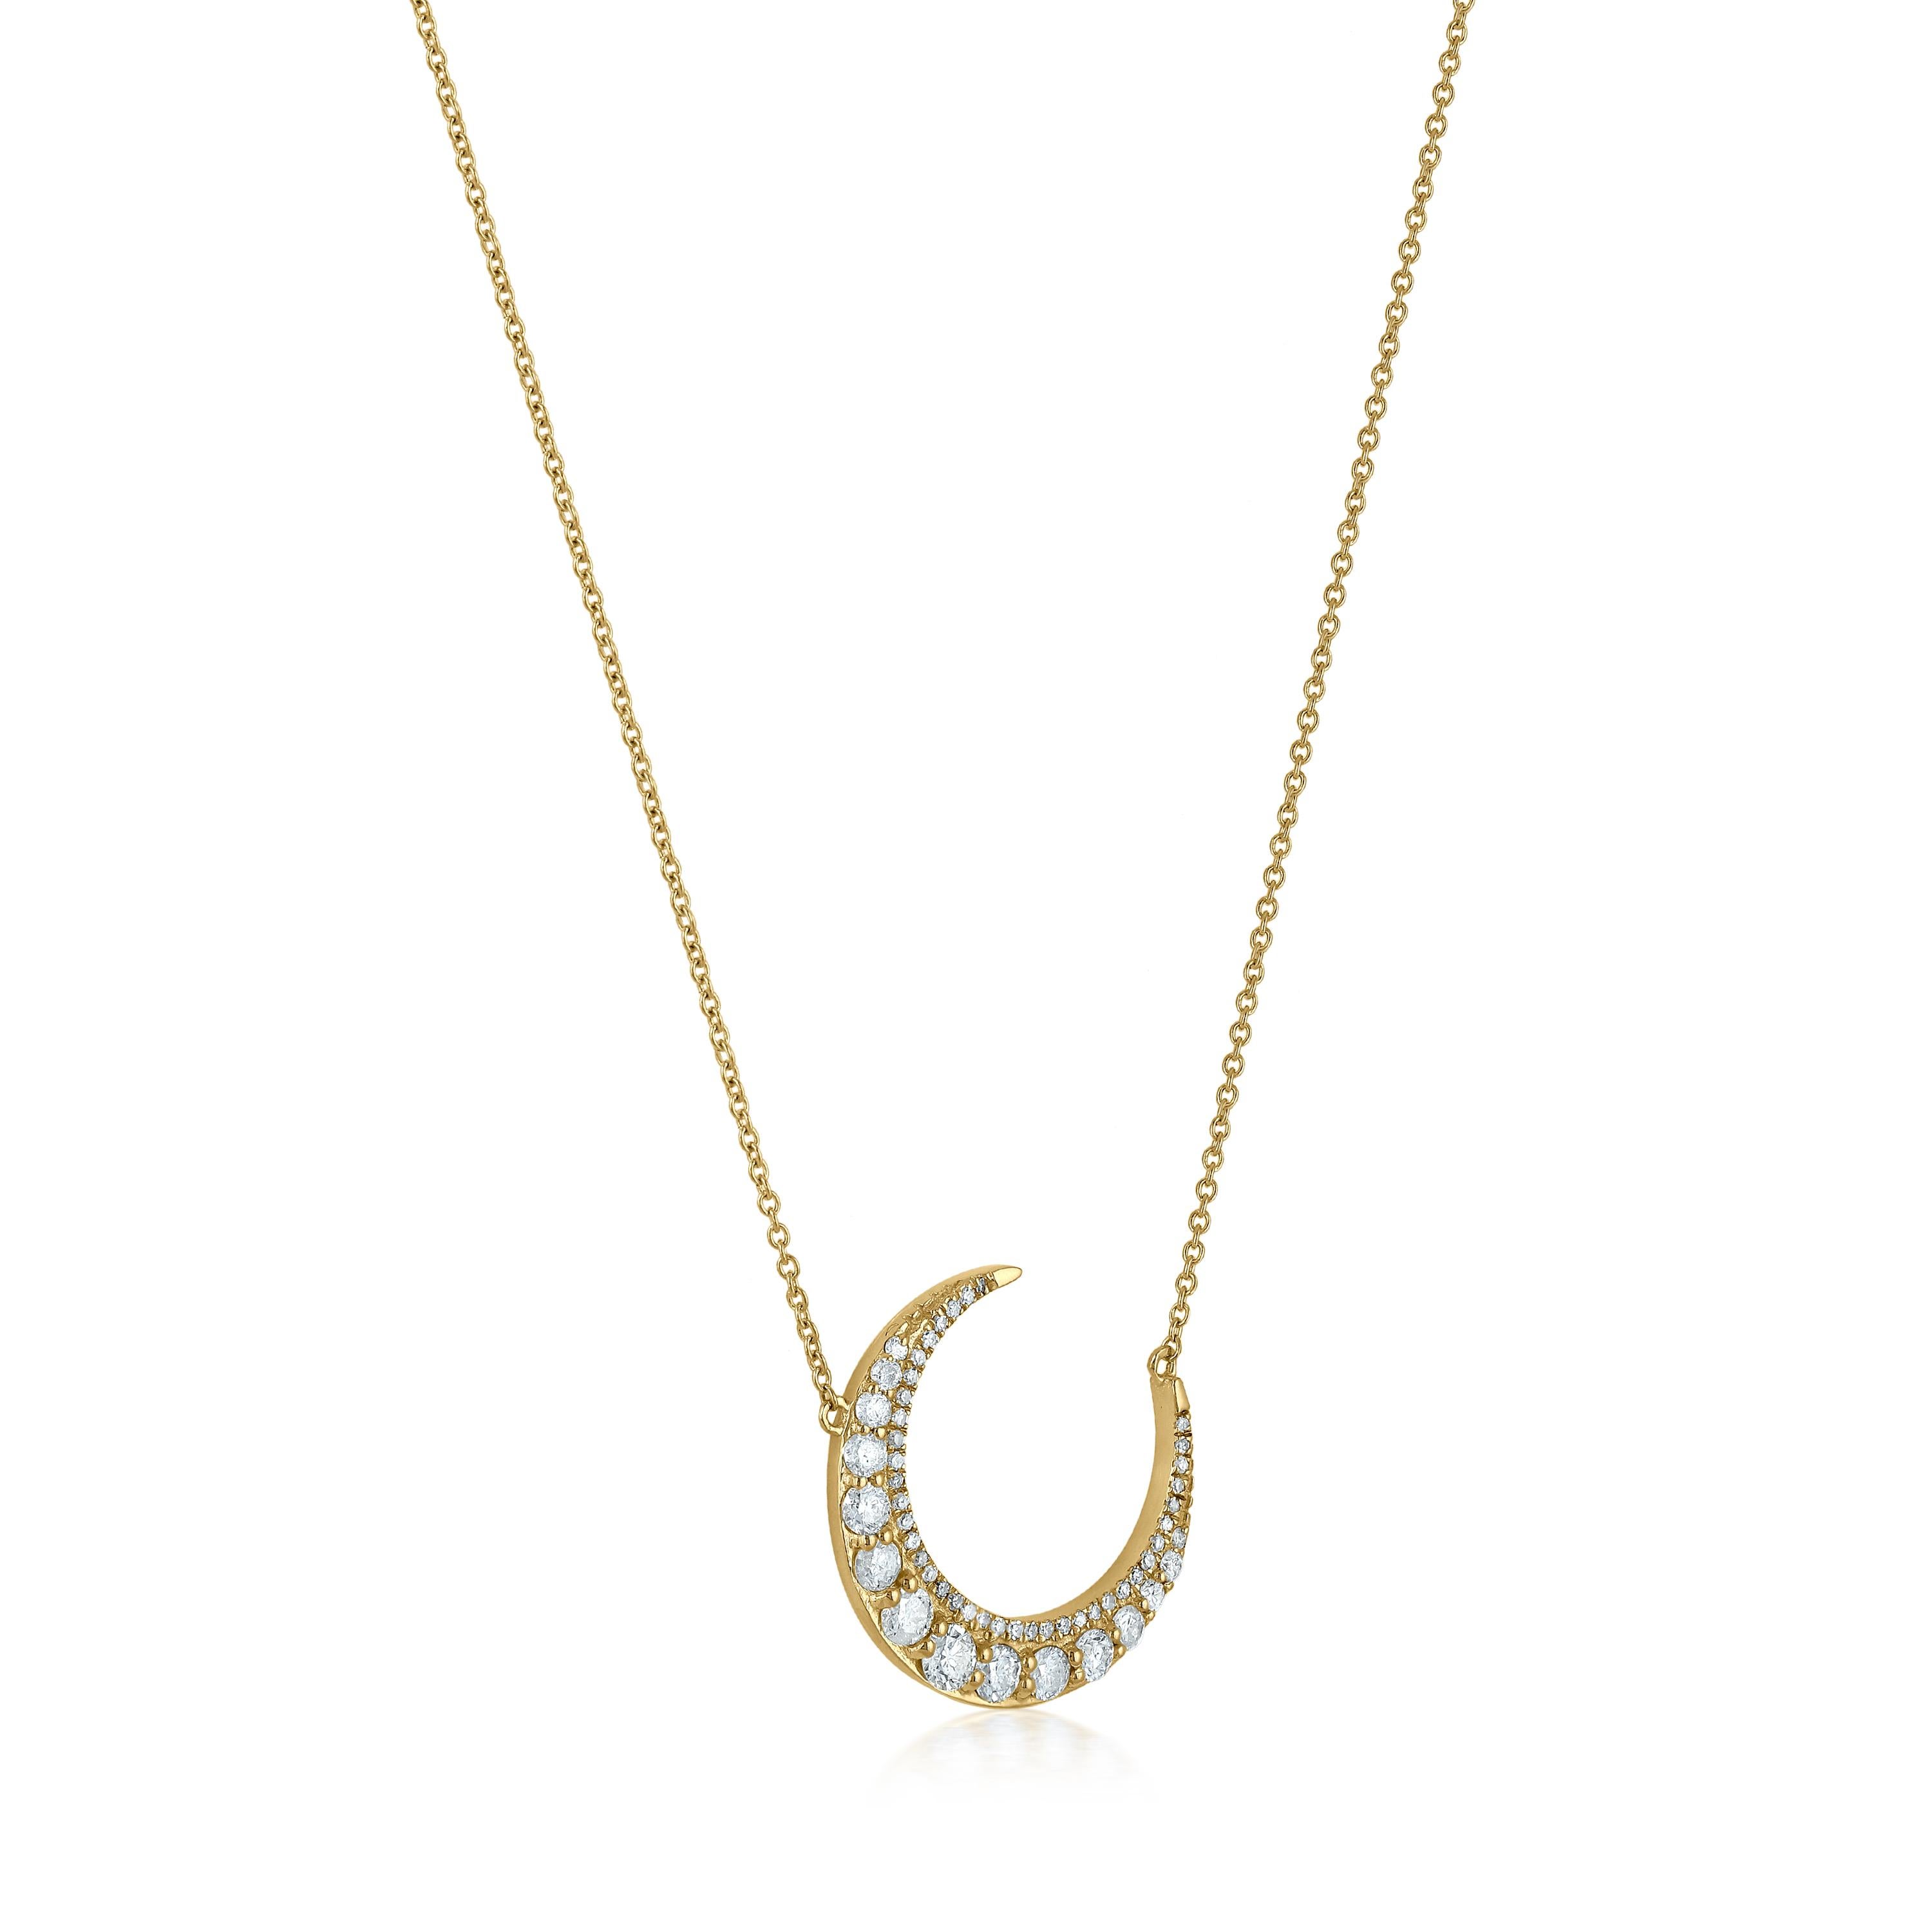 Featuring a crescent moon pendant decorated with dazzling diamonds by Luxle, this 14k yellow gold necklace takes your look to new heights. This pendant necklace is inspired by the grace of the moon and is as pure as the 0.69 Carats round full-cut